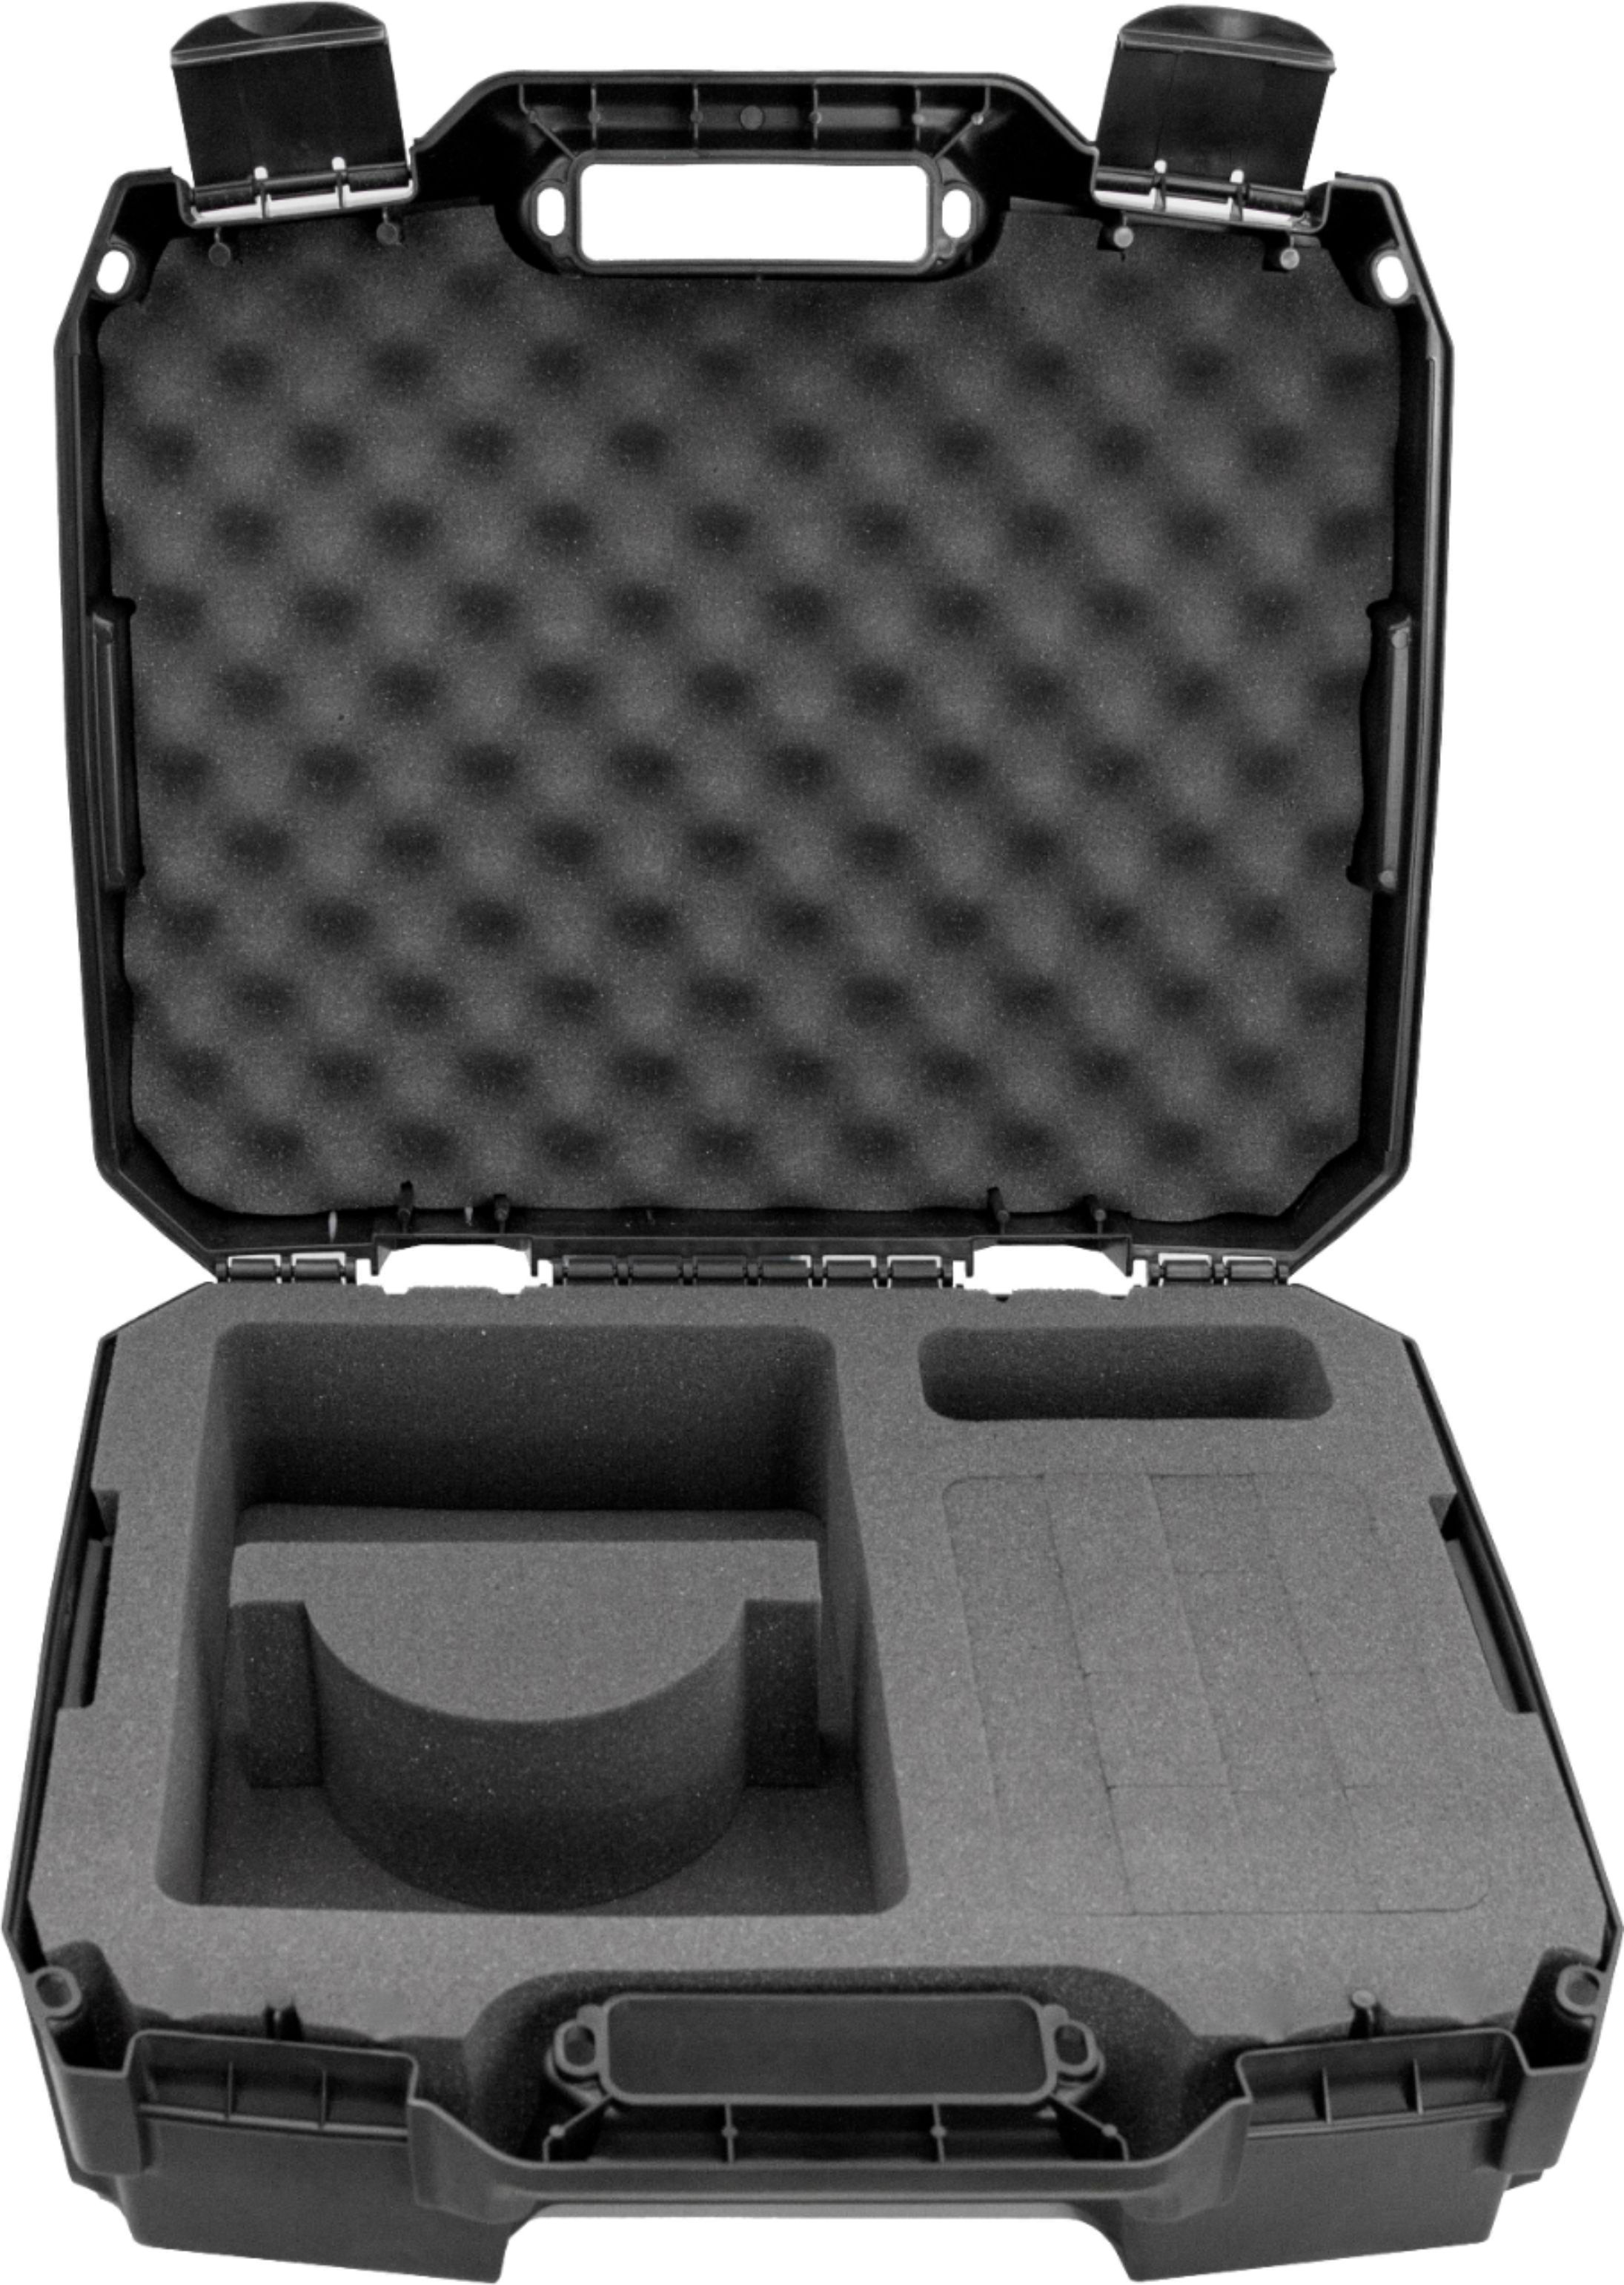 CASEMATIX Hard Shell Custom Travel Case for Meta Quest 3 and 2 VR